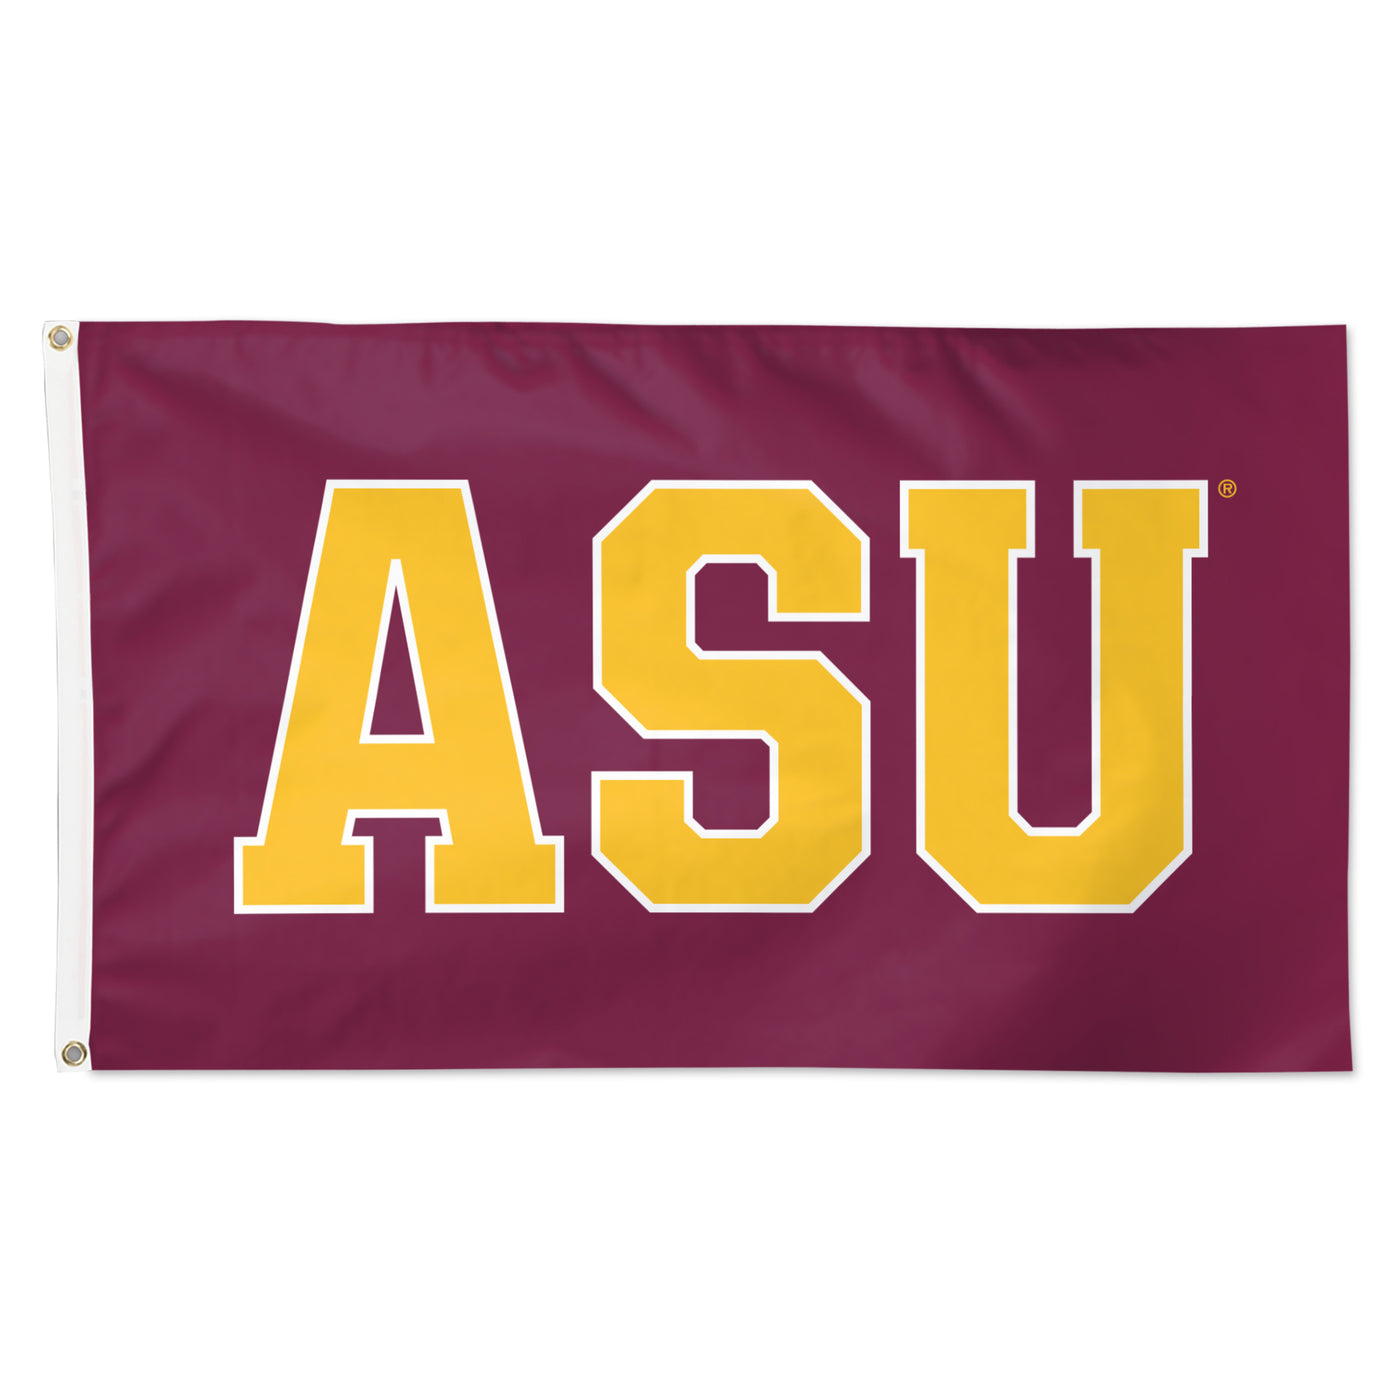 ASU maroon flag with the large text 